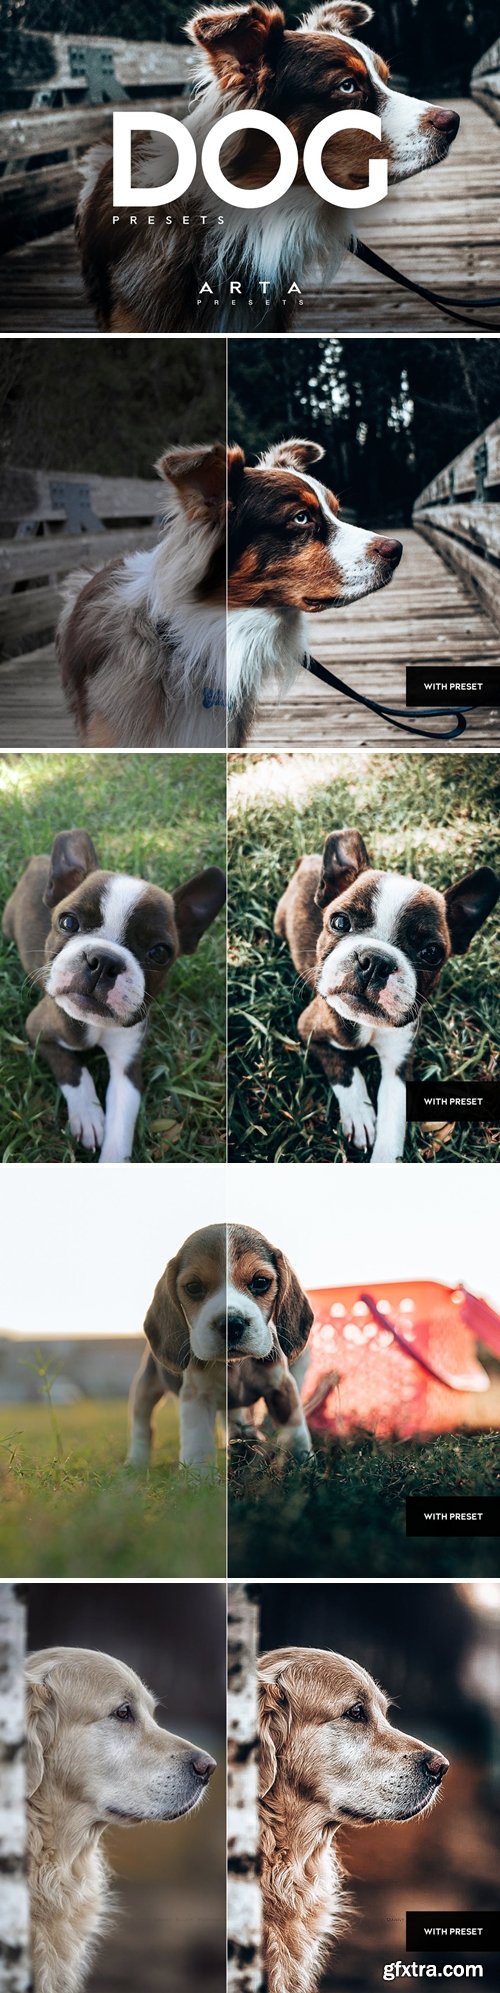 ARTA Dogs Presets For Mobile and Desktop